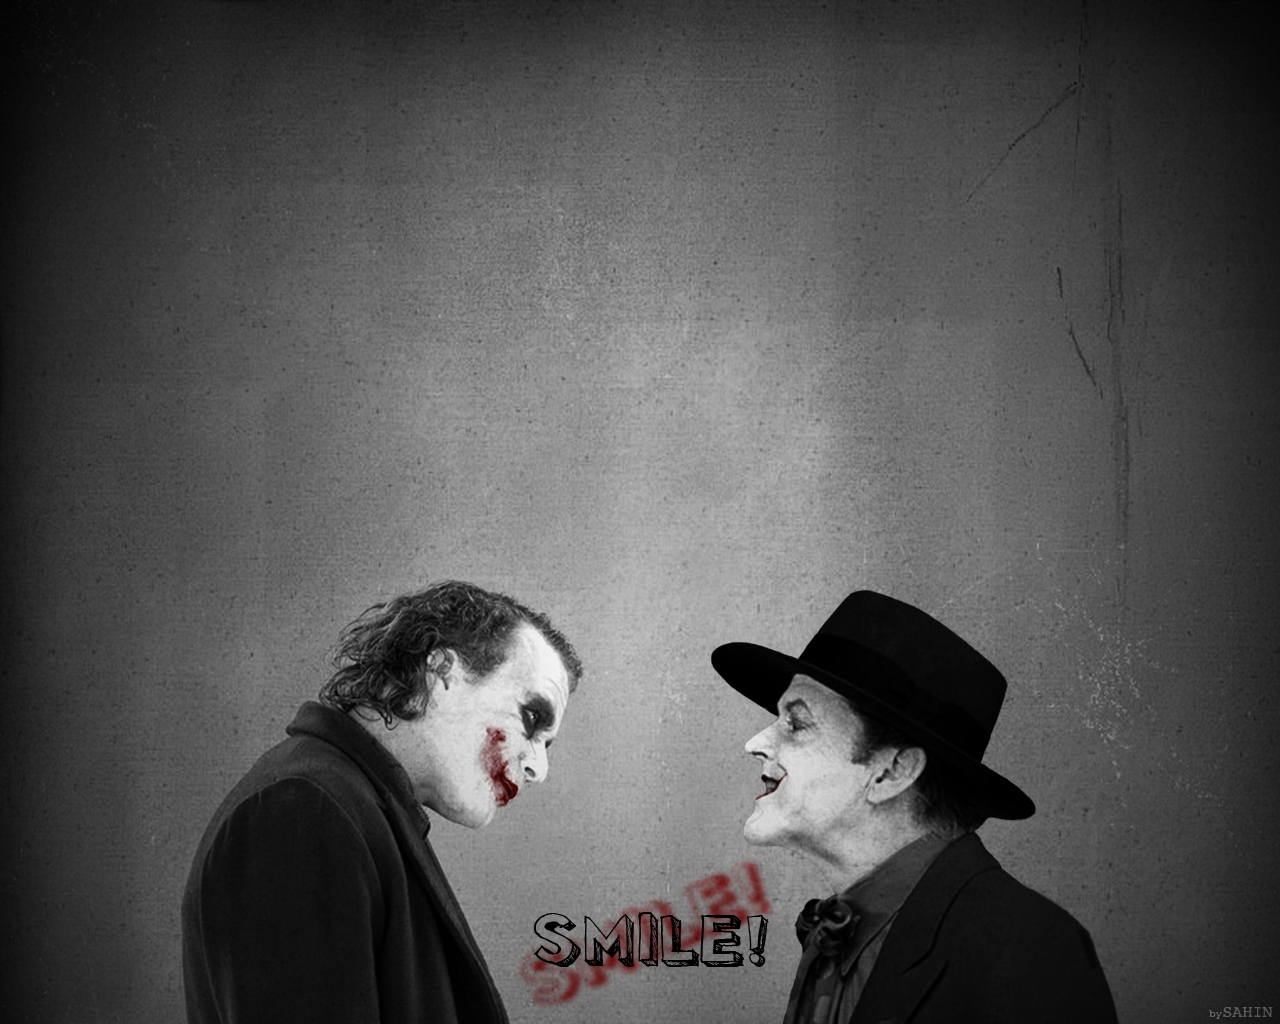 serious wallpaper,black and white,fictional character,photography,mime artist,joker